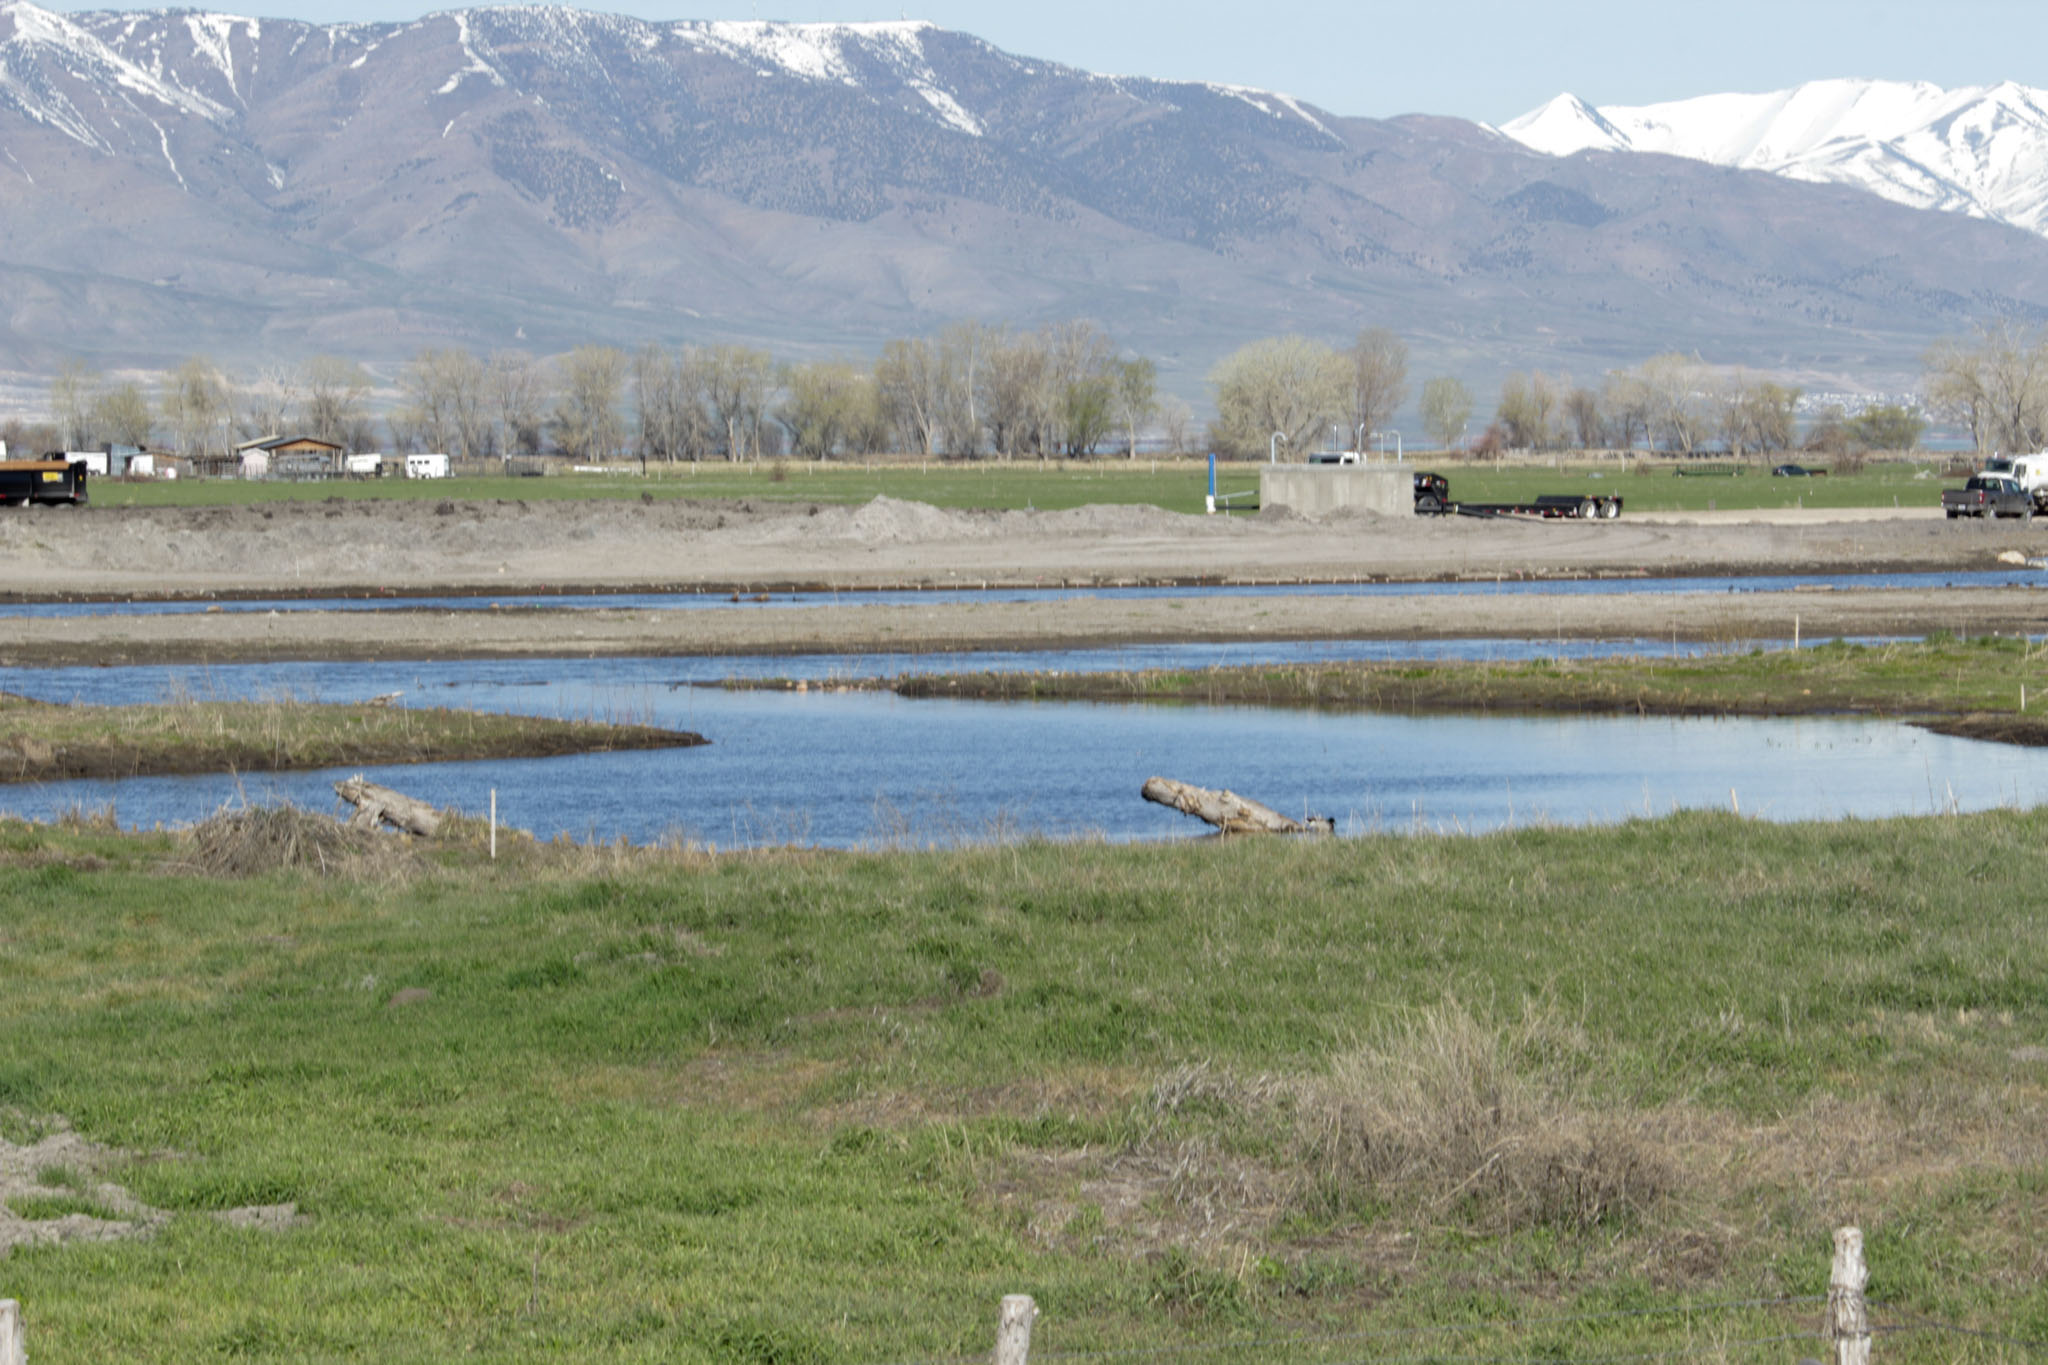 Water flowing through the new Provo River delta.